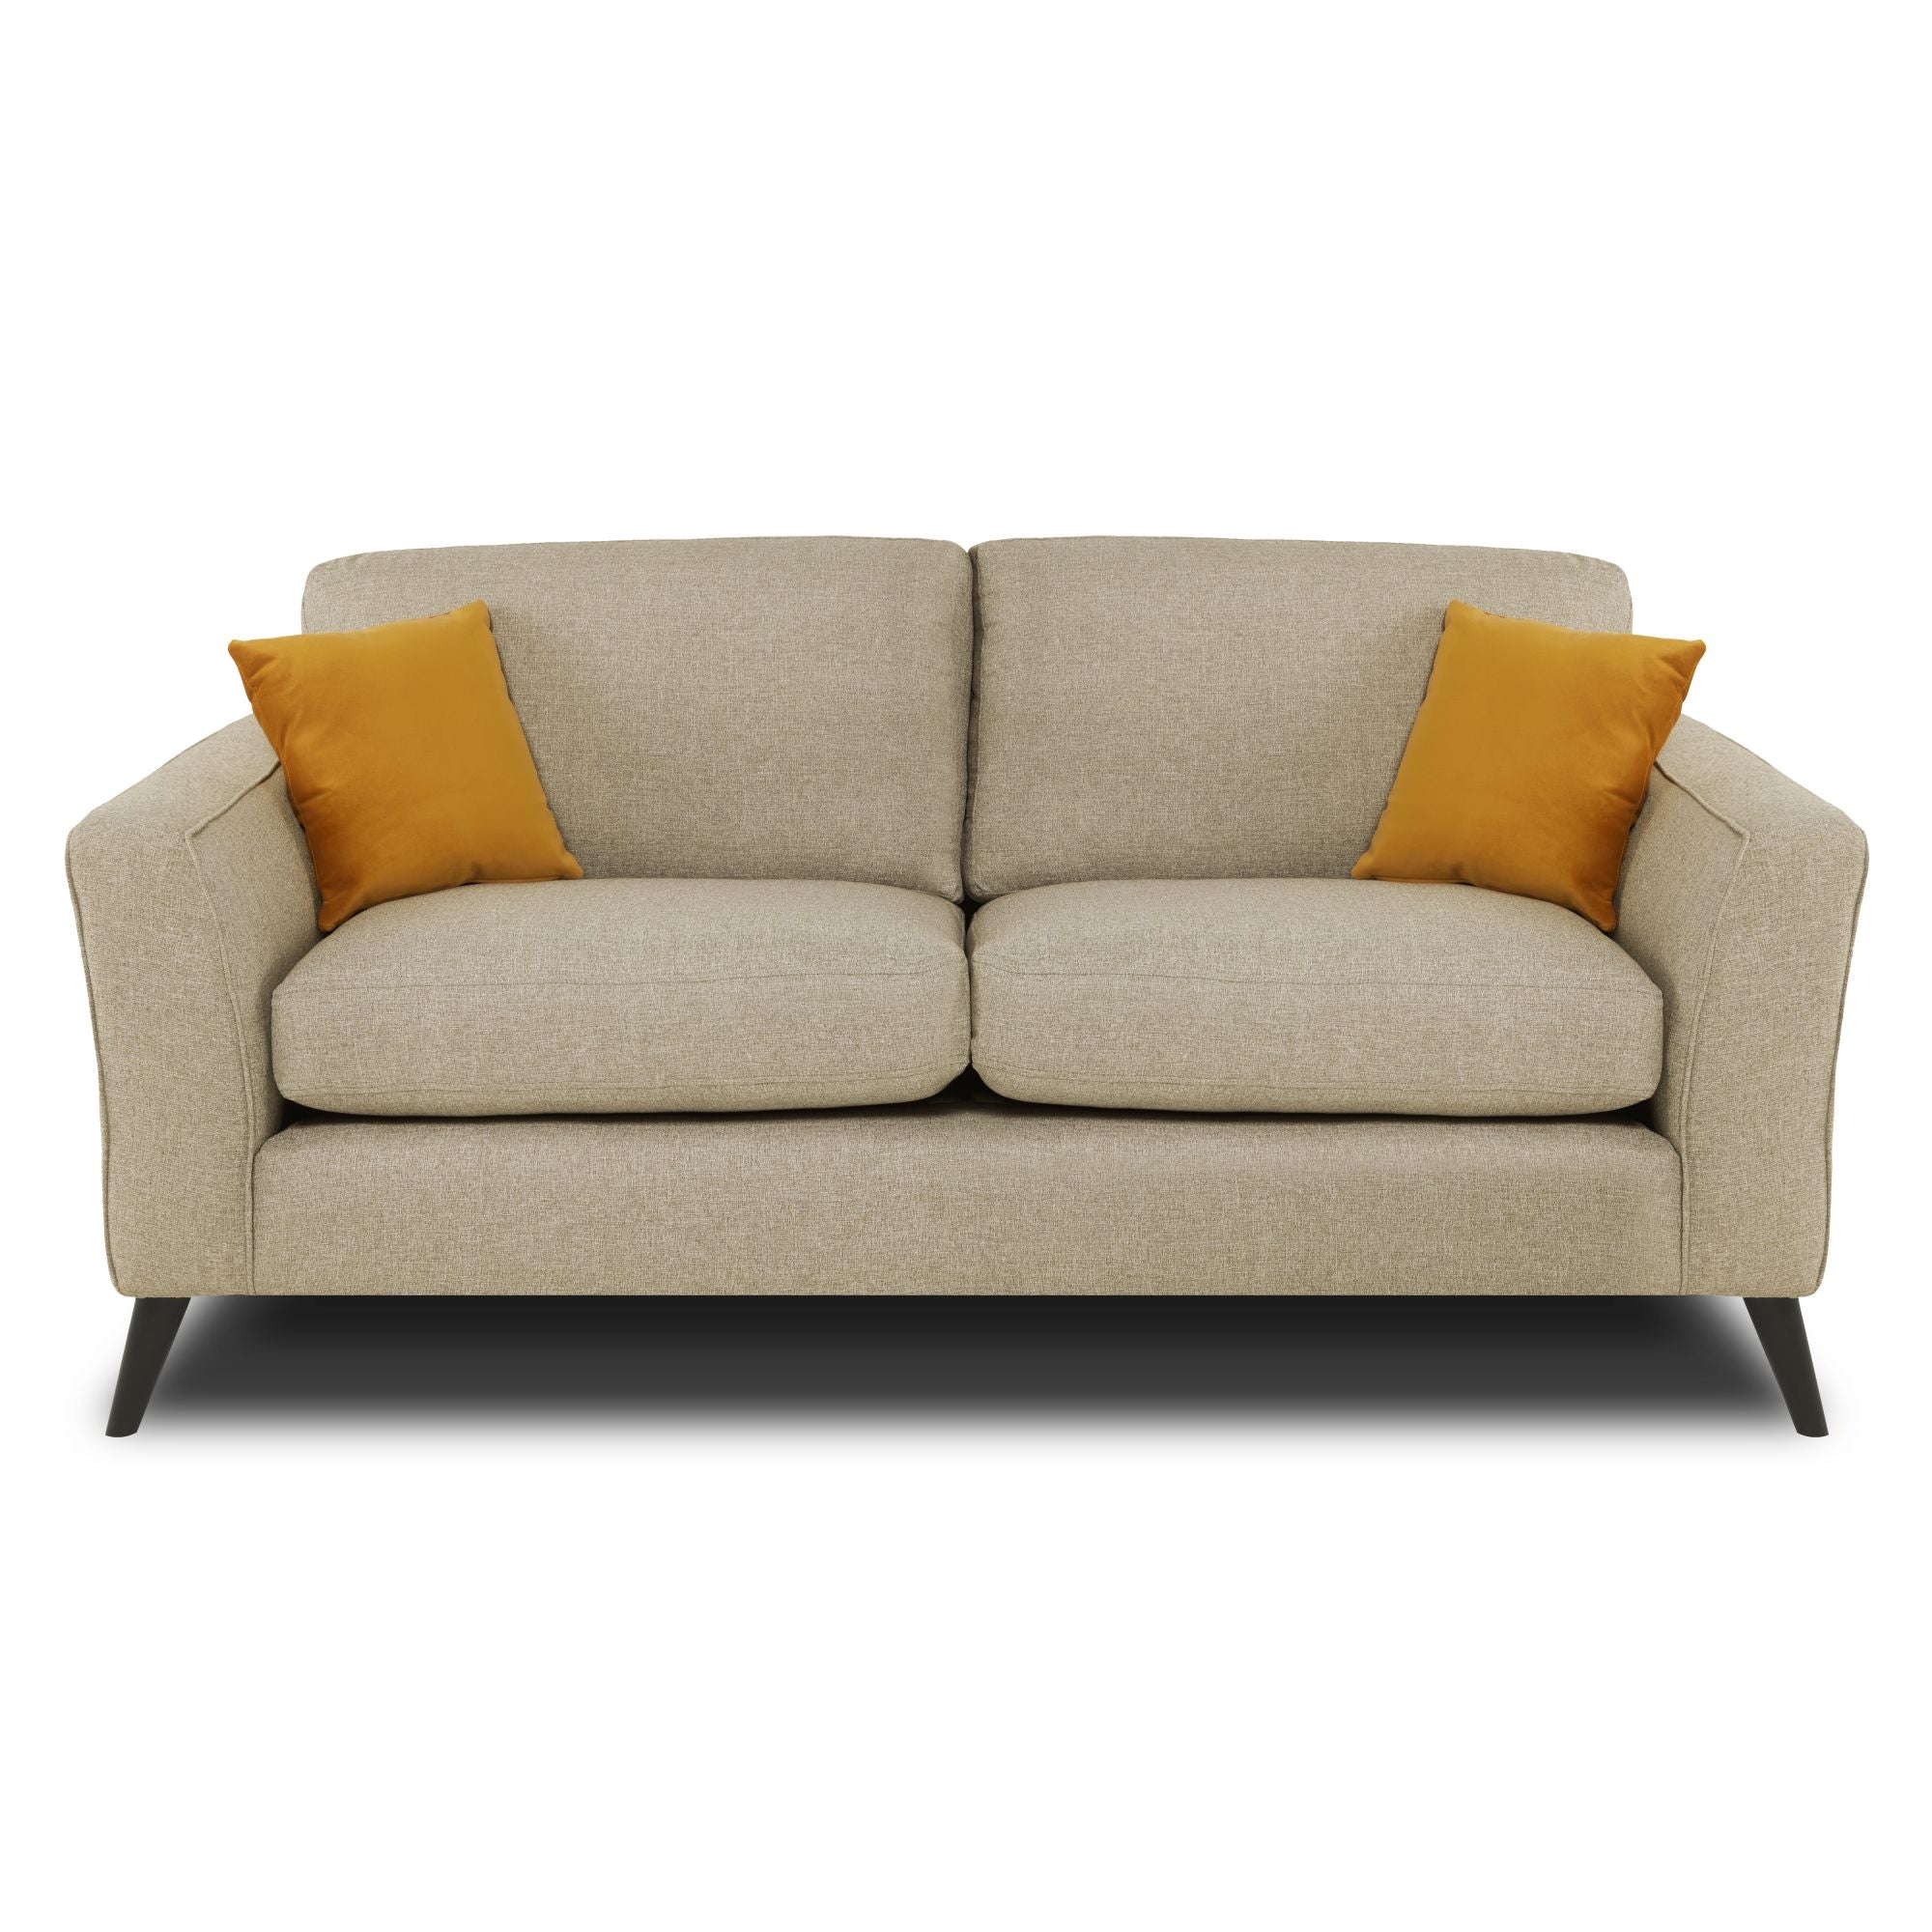 Libby 3 seater sofa in Oatmeal shown face on with a white background 